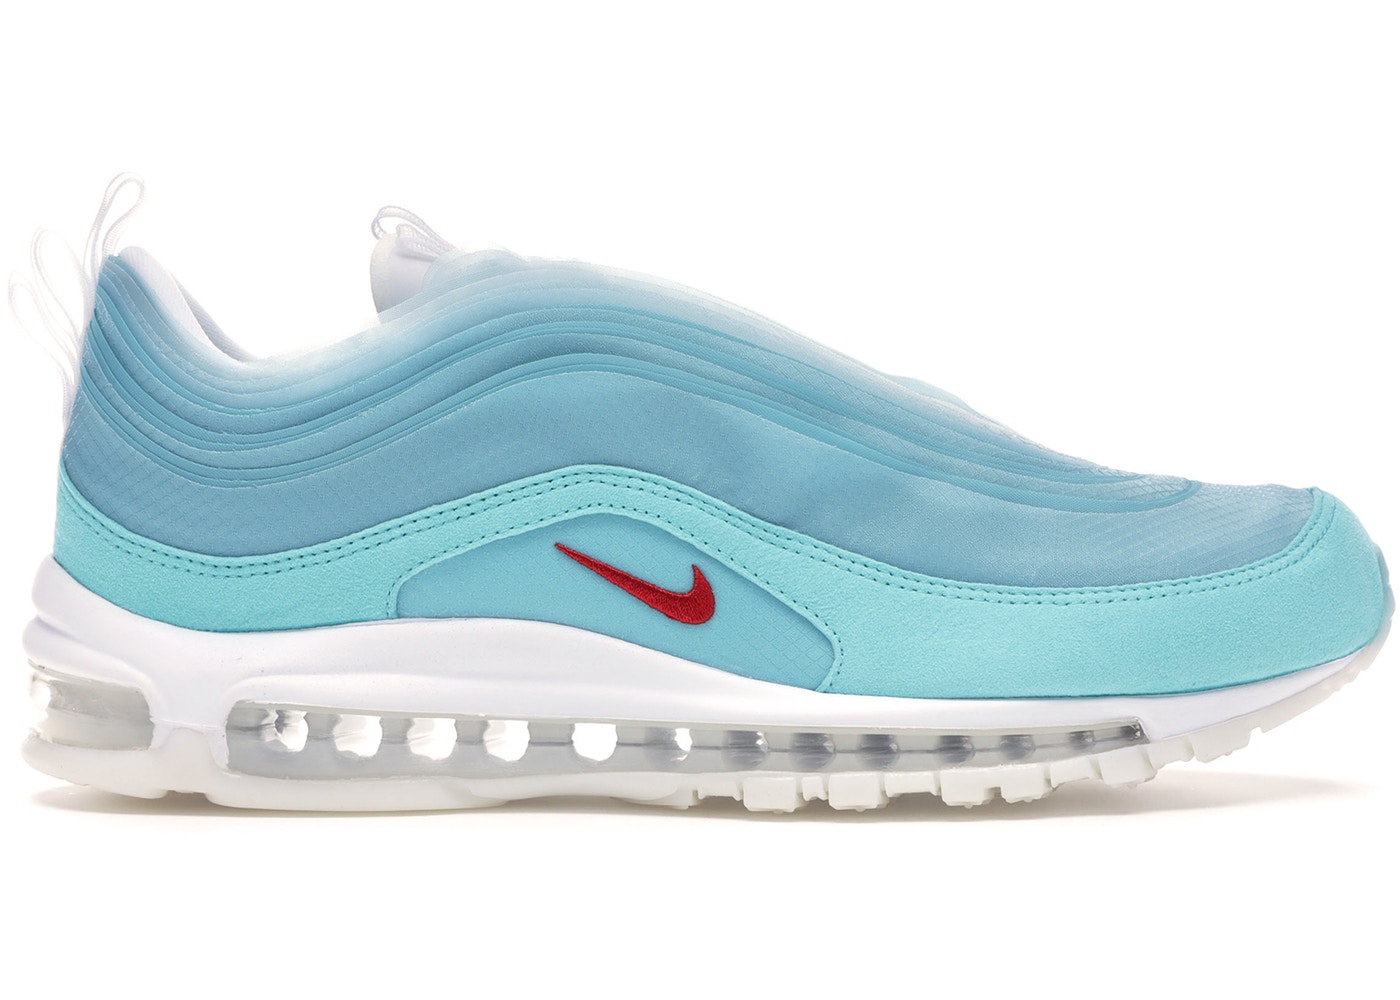 light blue and white air max 97